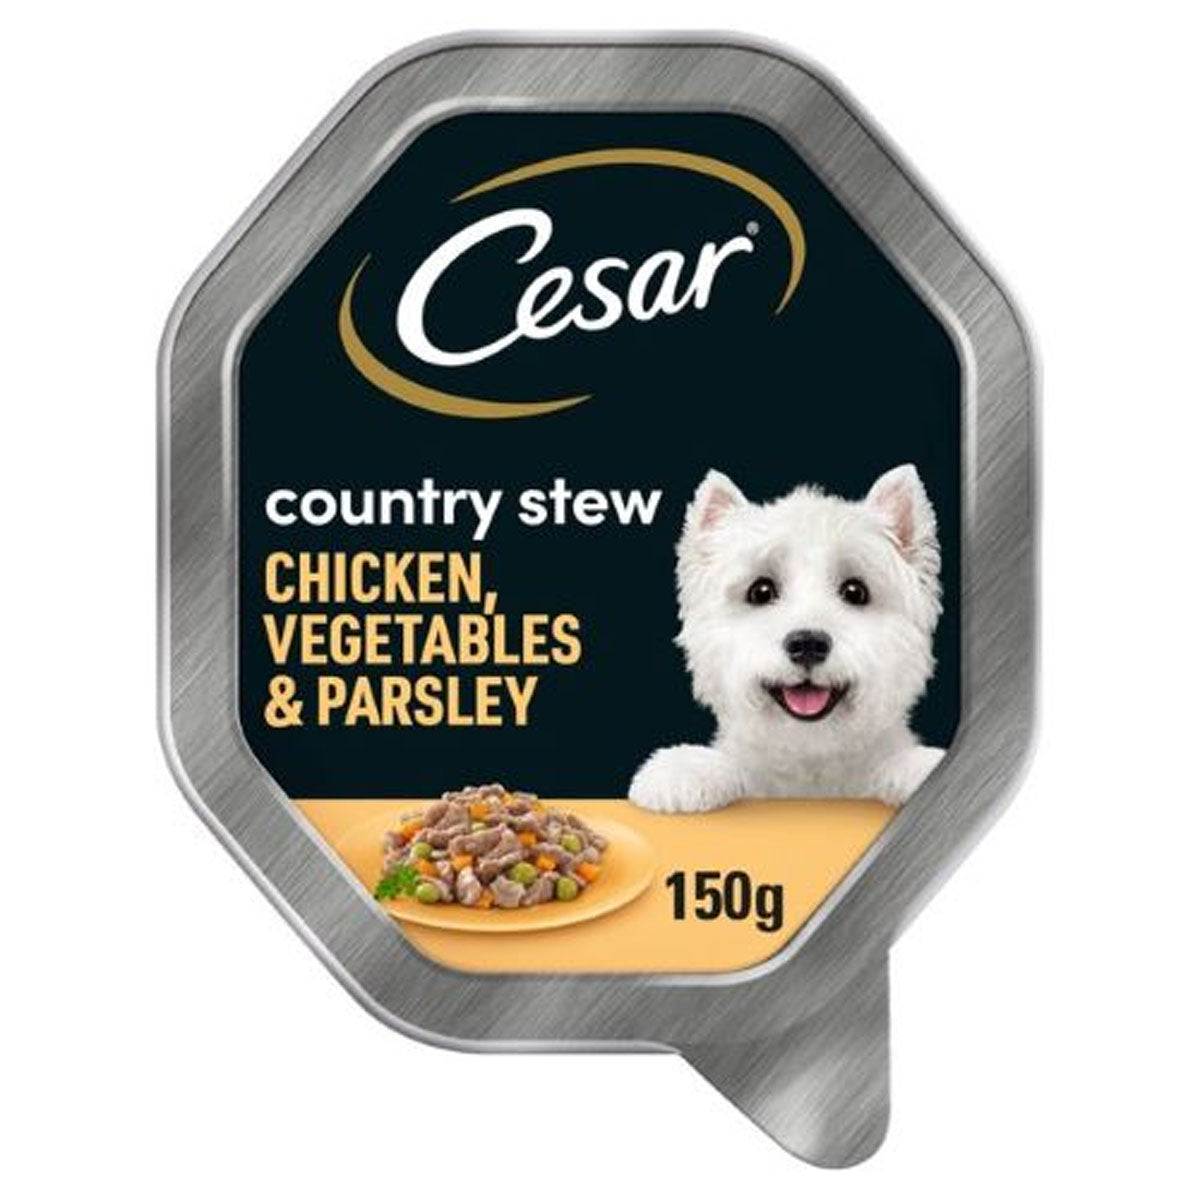 Cesar - Country Stew Adult Wet Dog Food - 150g - Continental Food Store